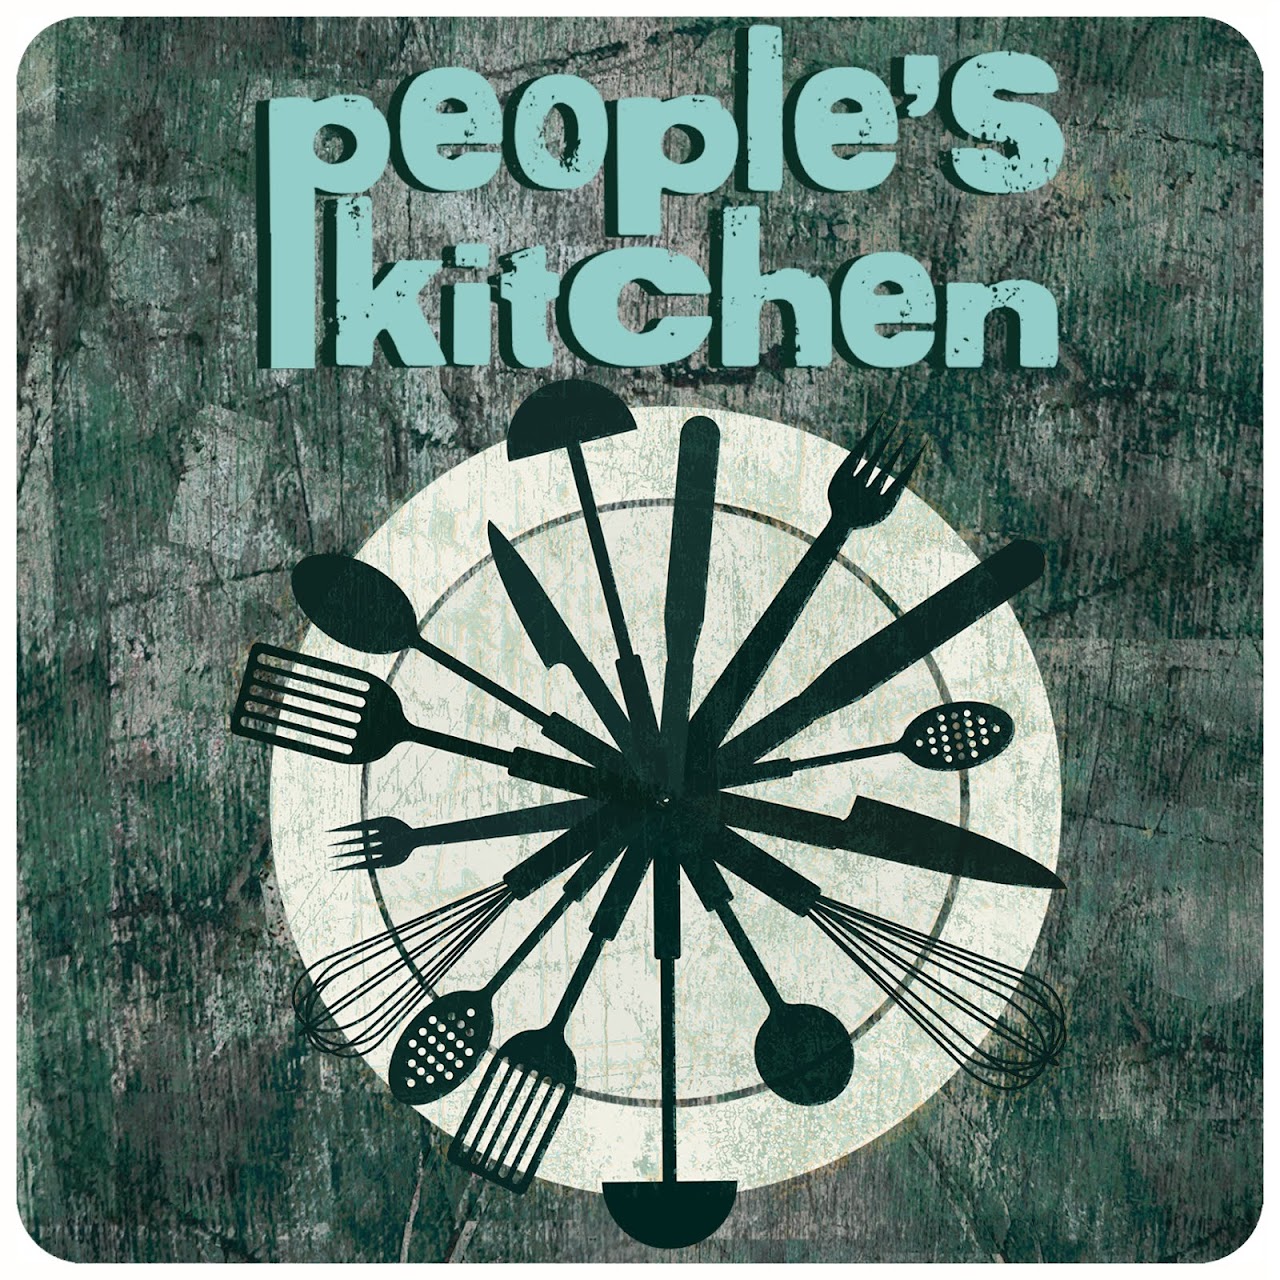 The People's Kitchen